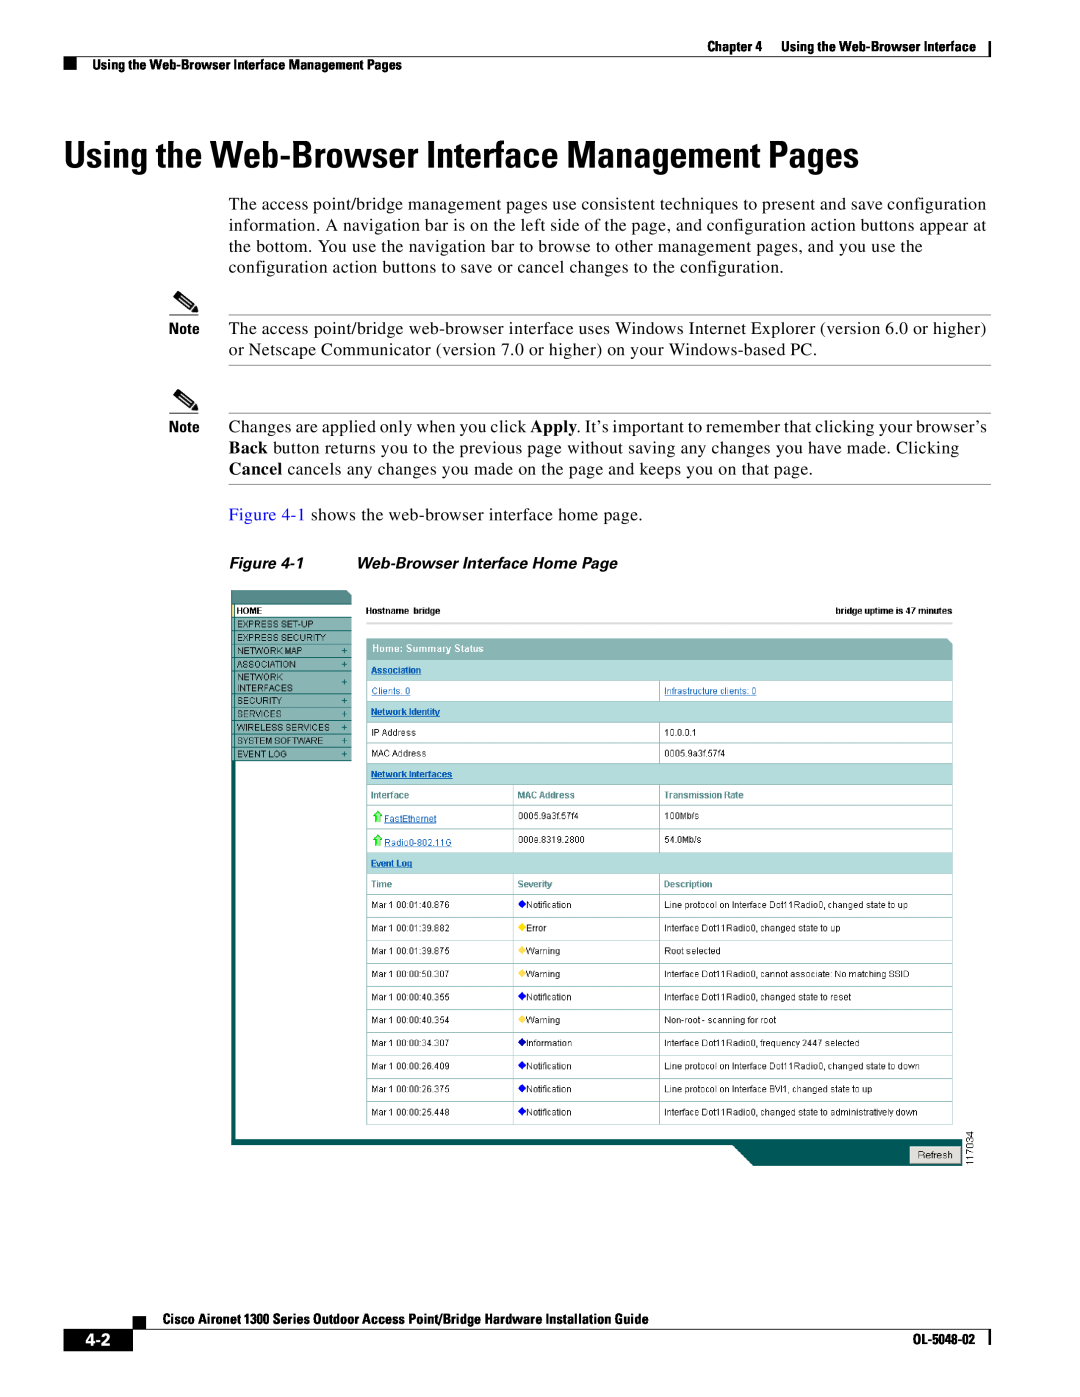 Cisco Systems 1300 Series manual Using the Web-Browser Interface Management Pages 